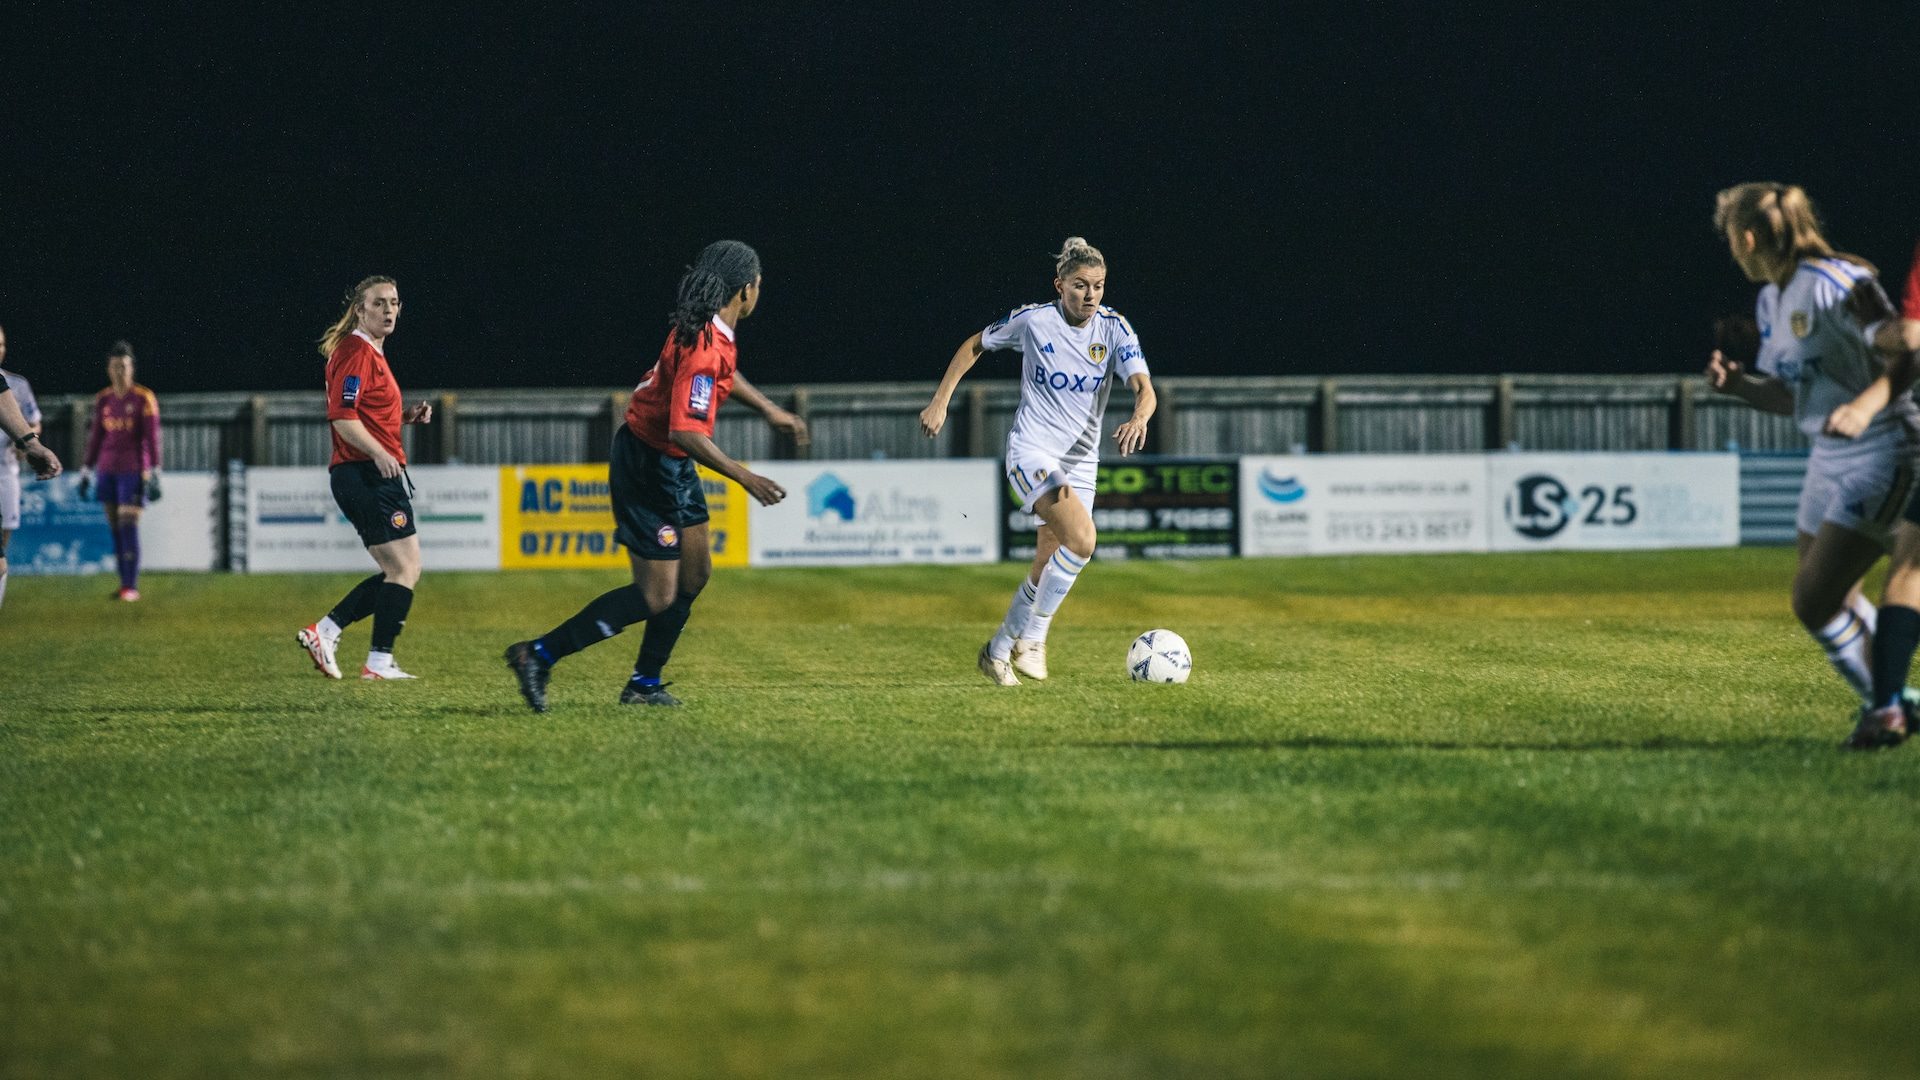 A photograph of Sarah Danby playing for Leeds United Women against some team in red